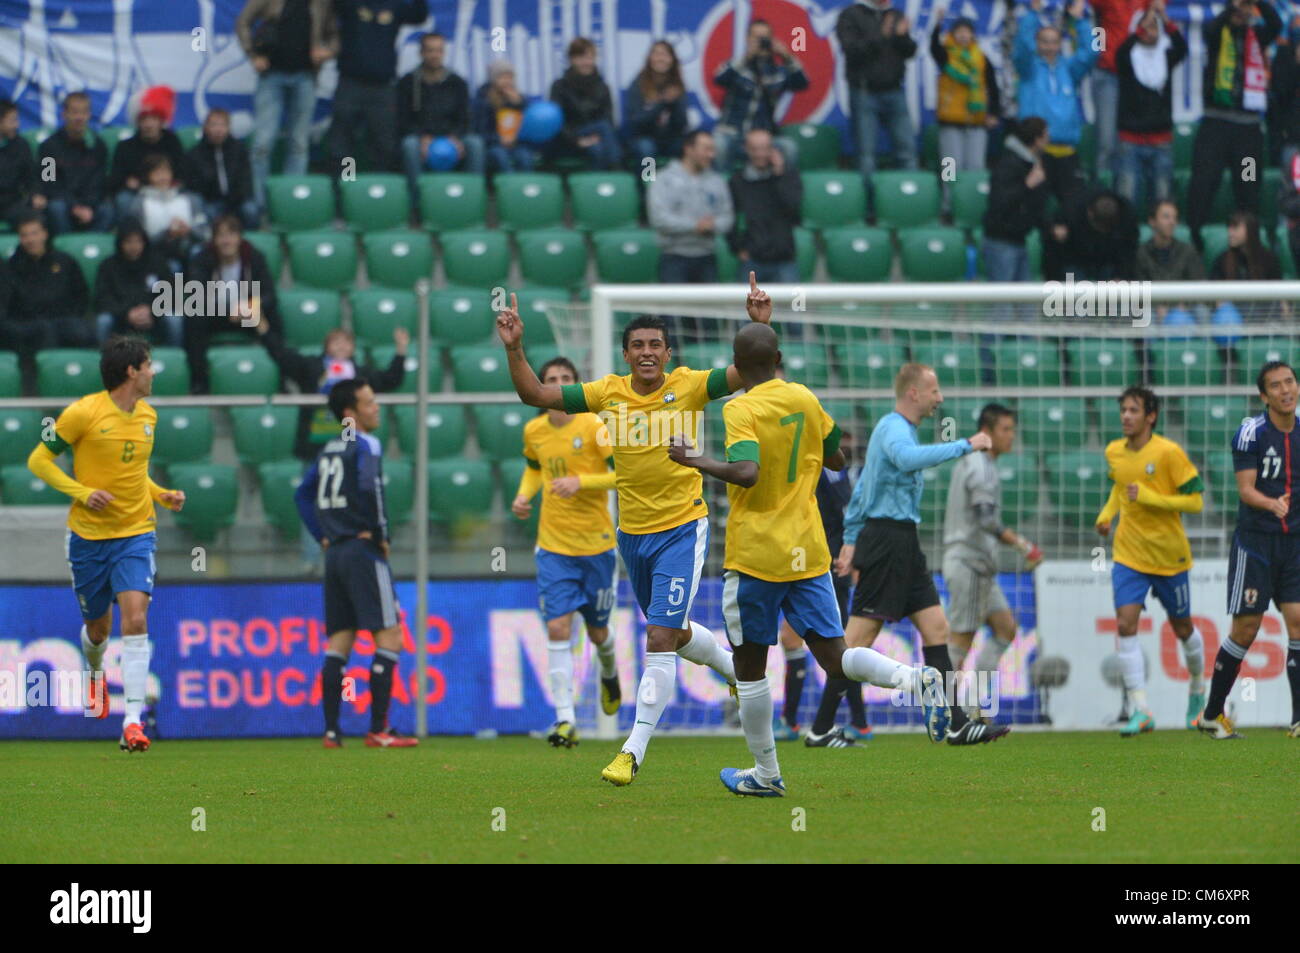 Paulinho (BRA), OCTOBER 16, 2012 - Football /Soccer : Paulinho #5 of Brazil celebrates with his teammates Ramires #7 after scoring the opening goal during the international friendly match between Japan 0-4 Brazil at Municipal Stadium in Wroclaw, Poland. (Photo by Jinten Sawada/AFLO) Stock Photo